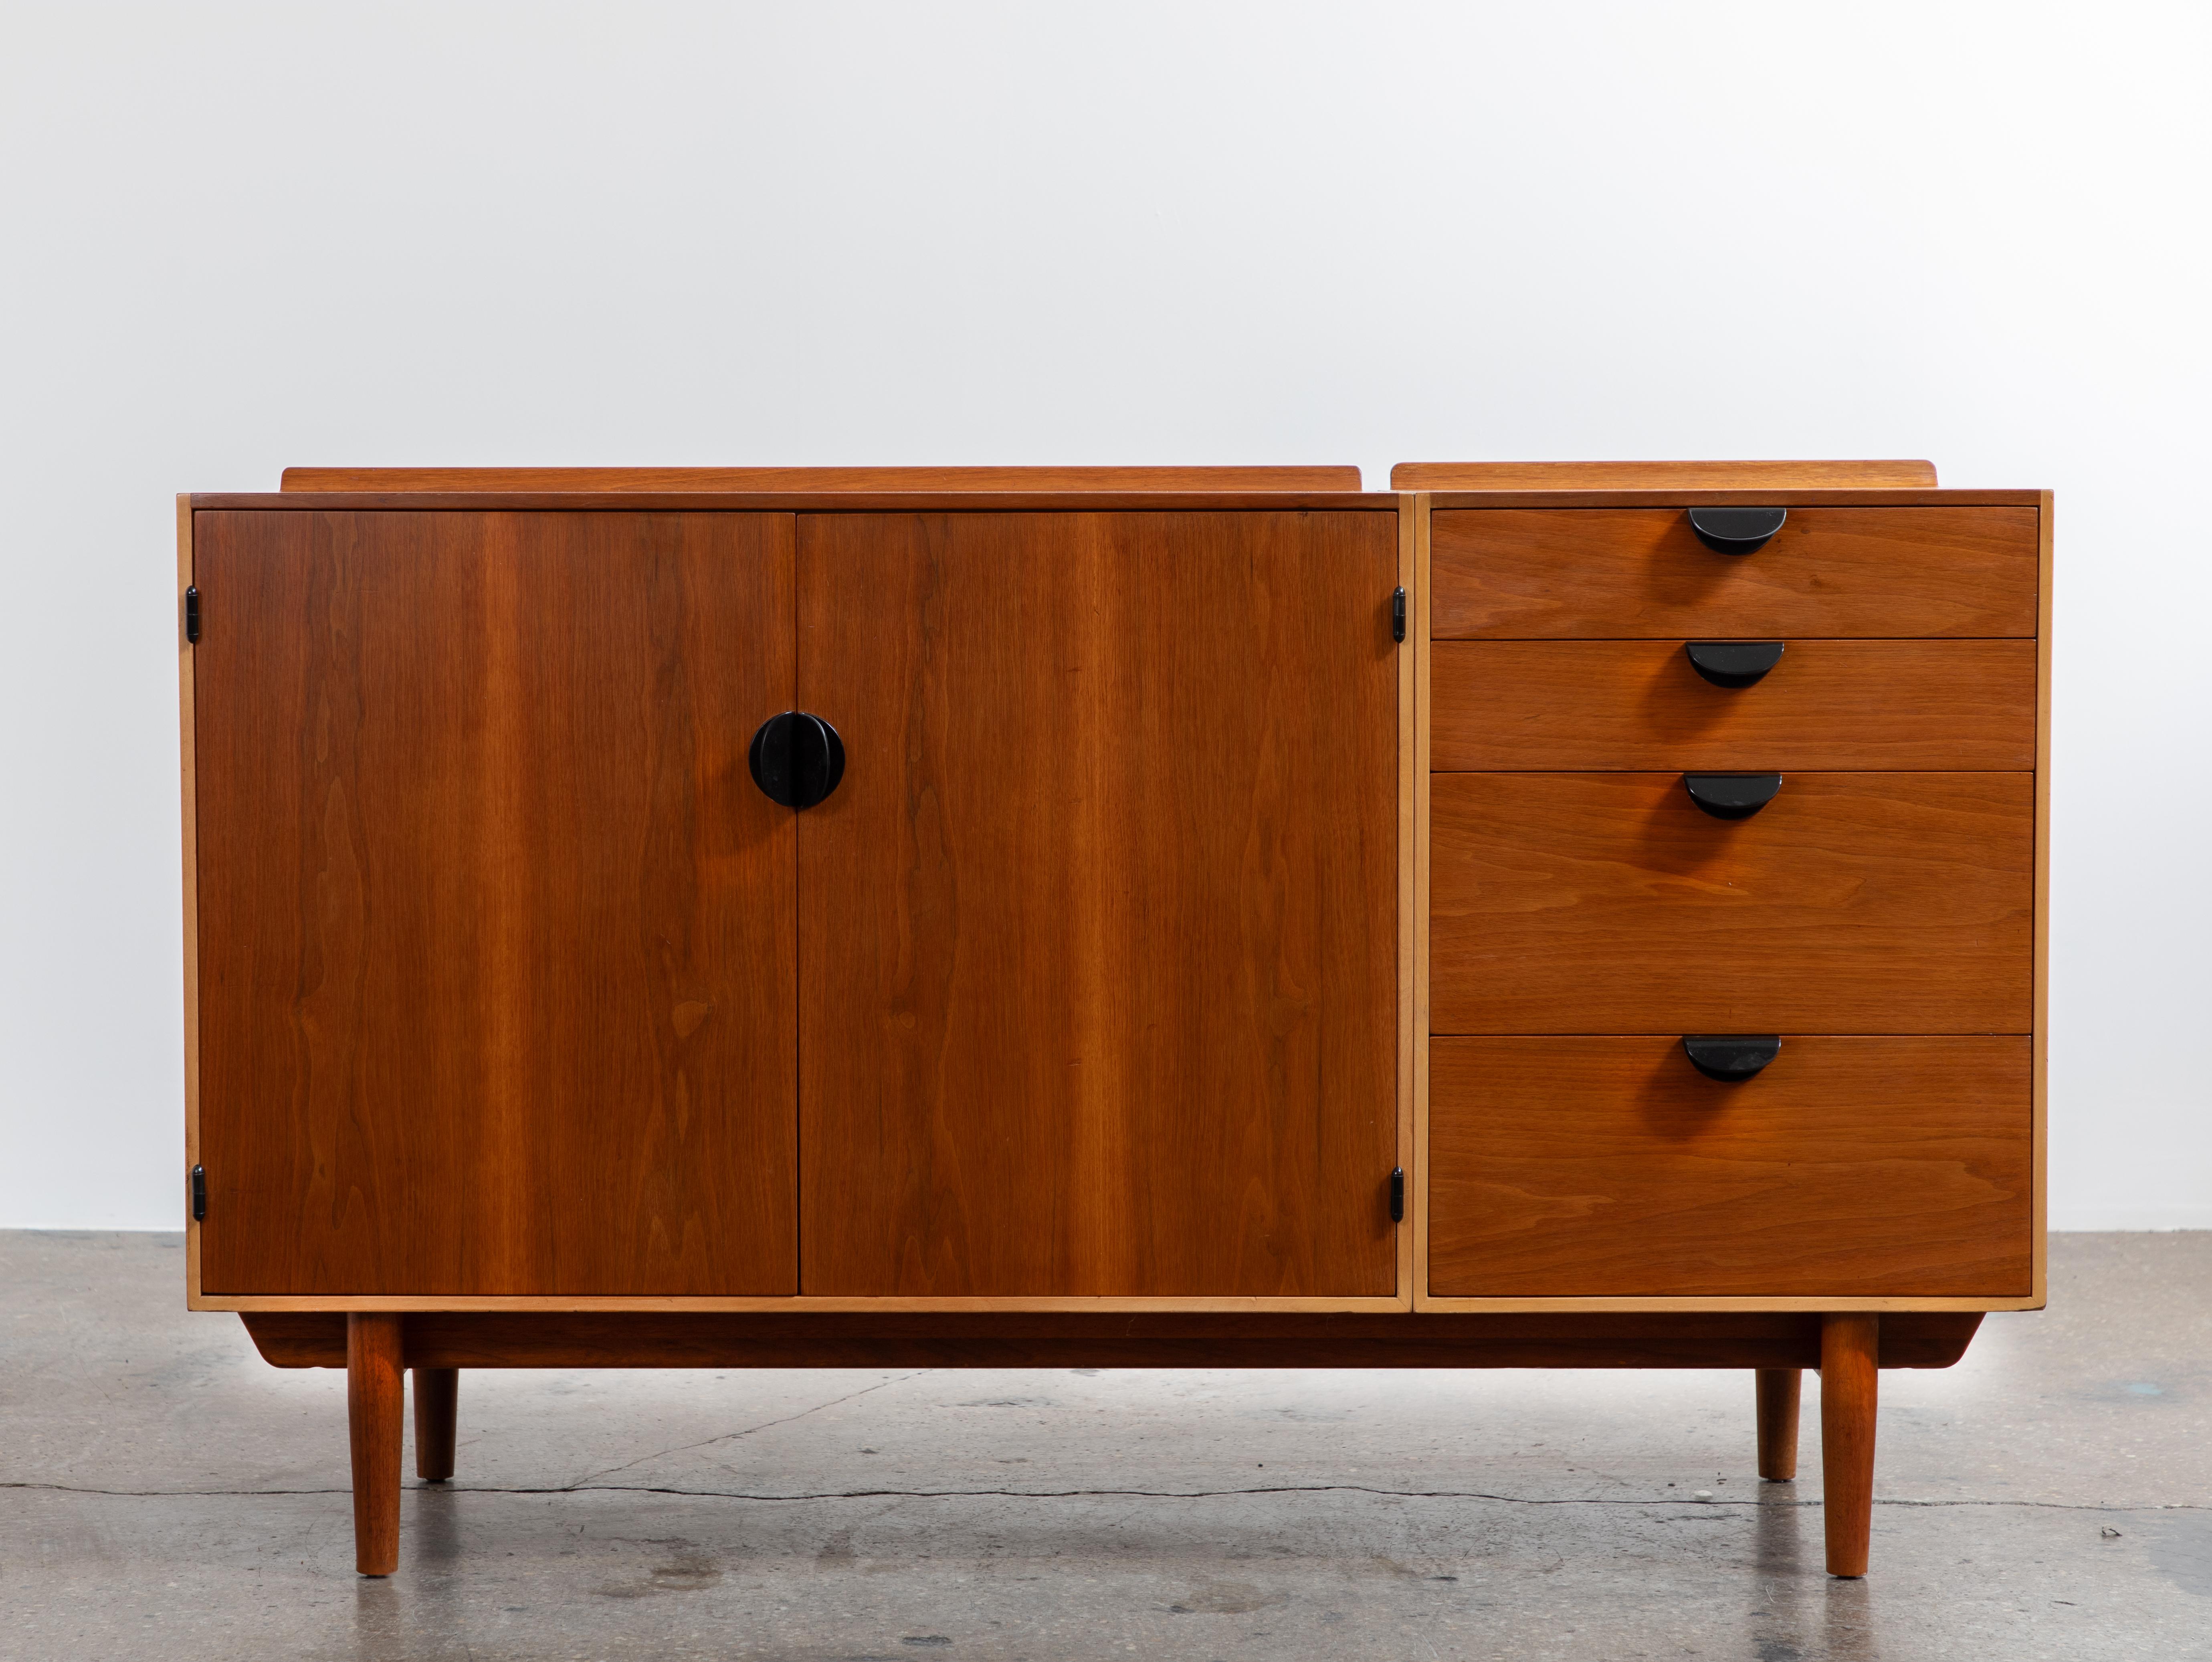 A classic credenza, designed by the architect Finn Juhl for the famed American manufacturer Baker Furniture, as a part of the Baker Modern line. This handsome cabinet features all the hallmarks of the Danish designer,  with its flowing lines,